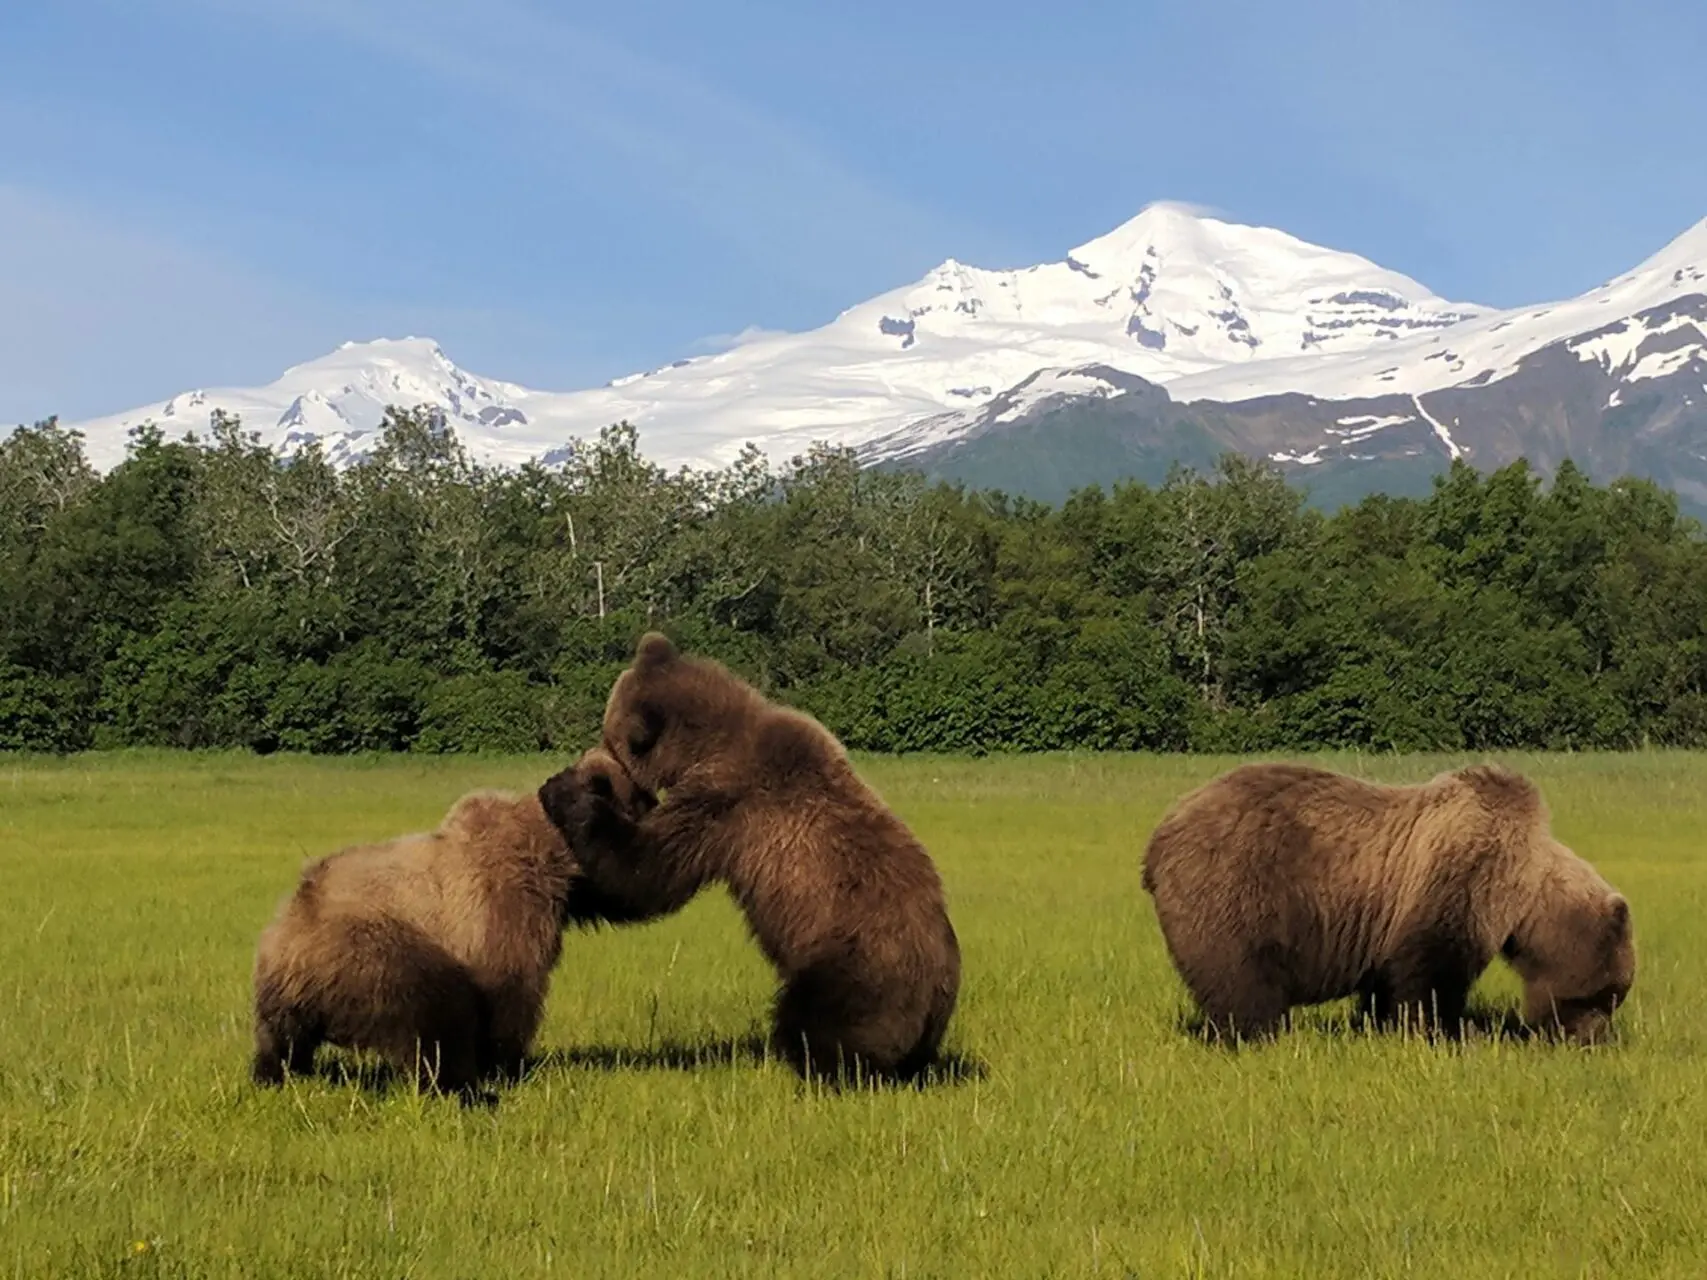 Three bears are playing in a field with mountains in the background.